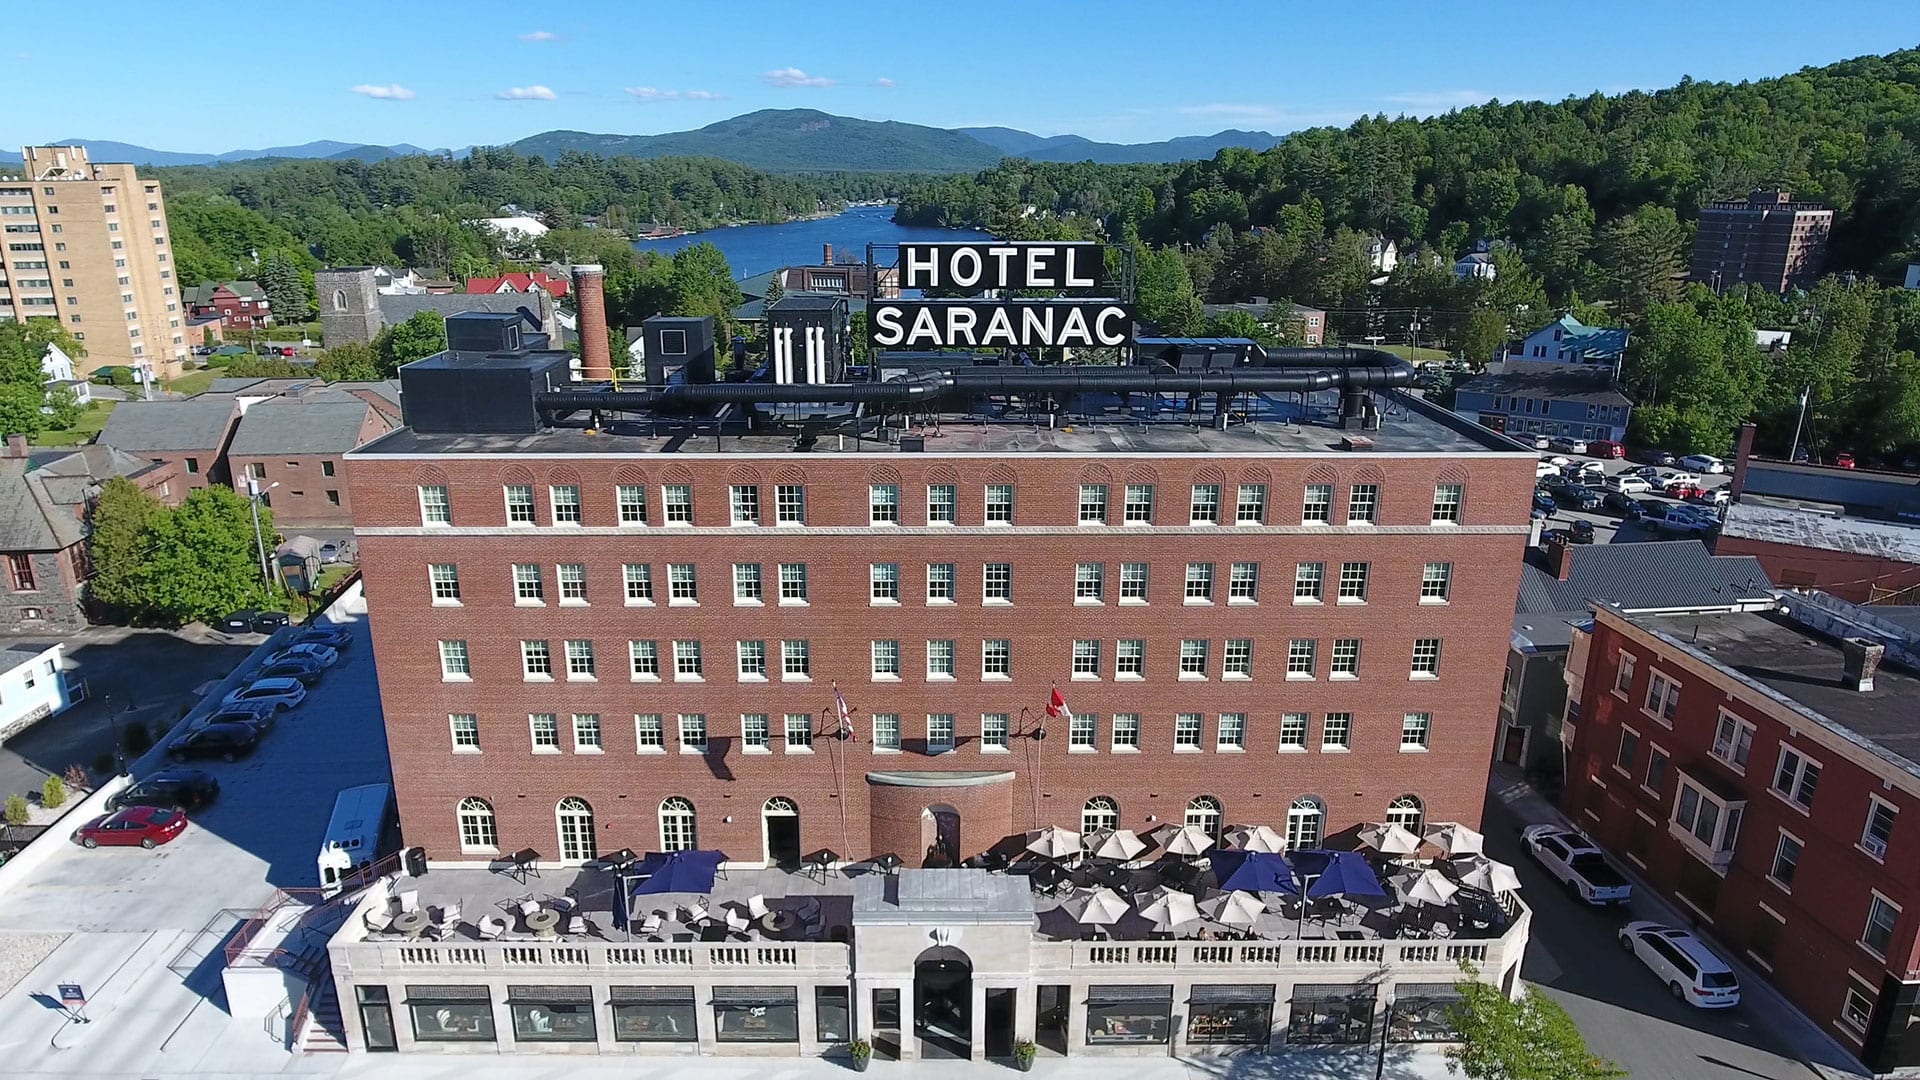 An aerial view of the Hotel Saranac.